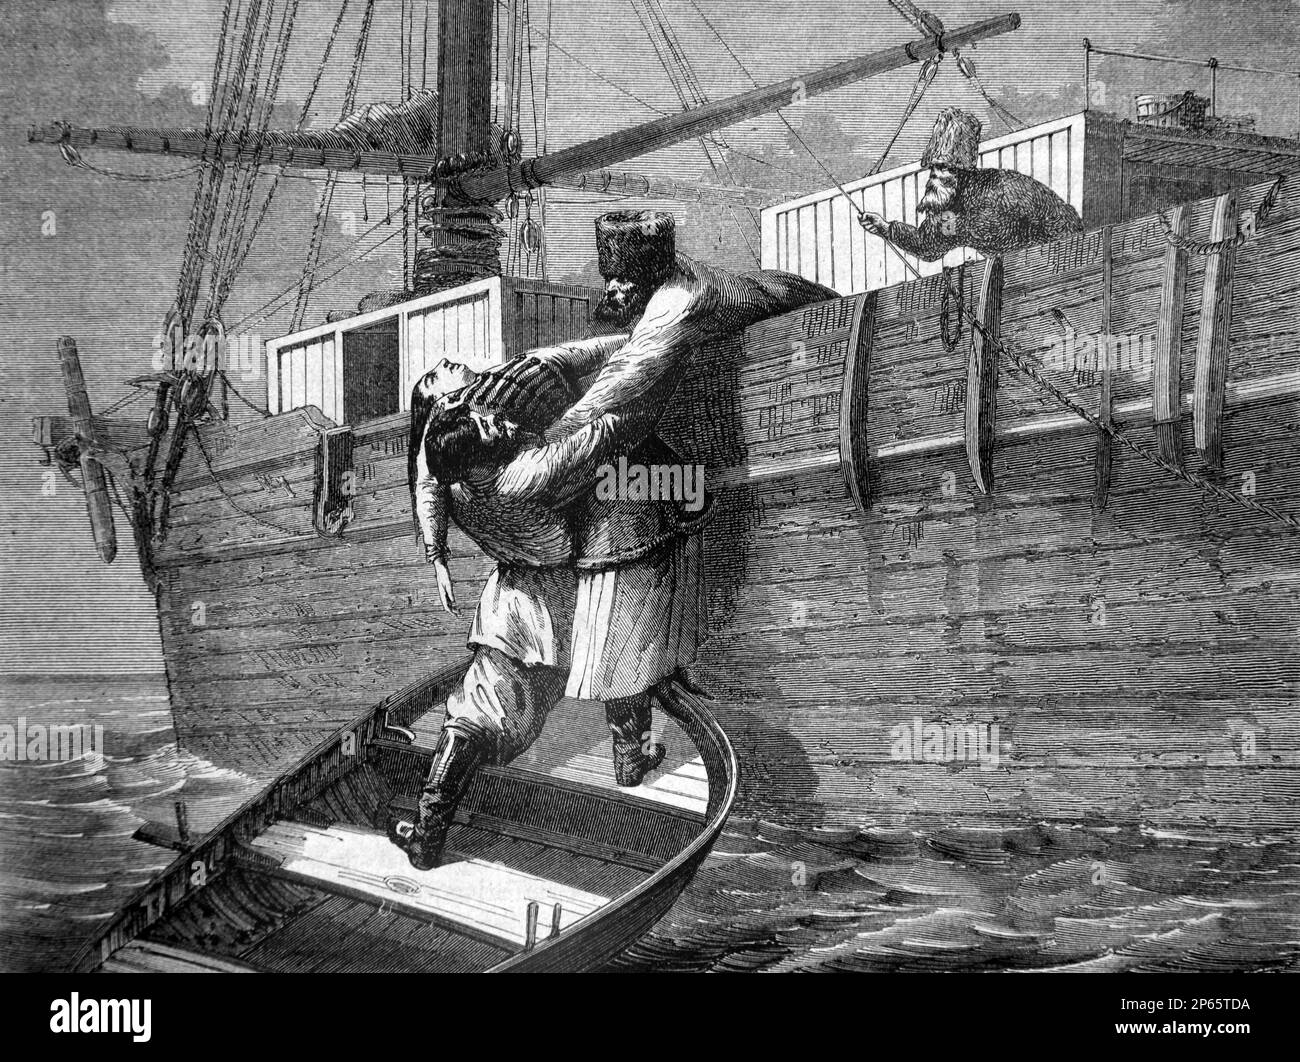 Russian Sailors on Wooden Cargo Ship Rescue Man from Sea Russia. Vintage Engraving or Illustration 1862 Stock Photo